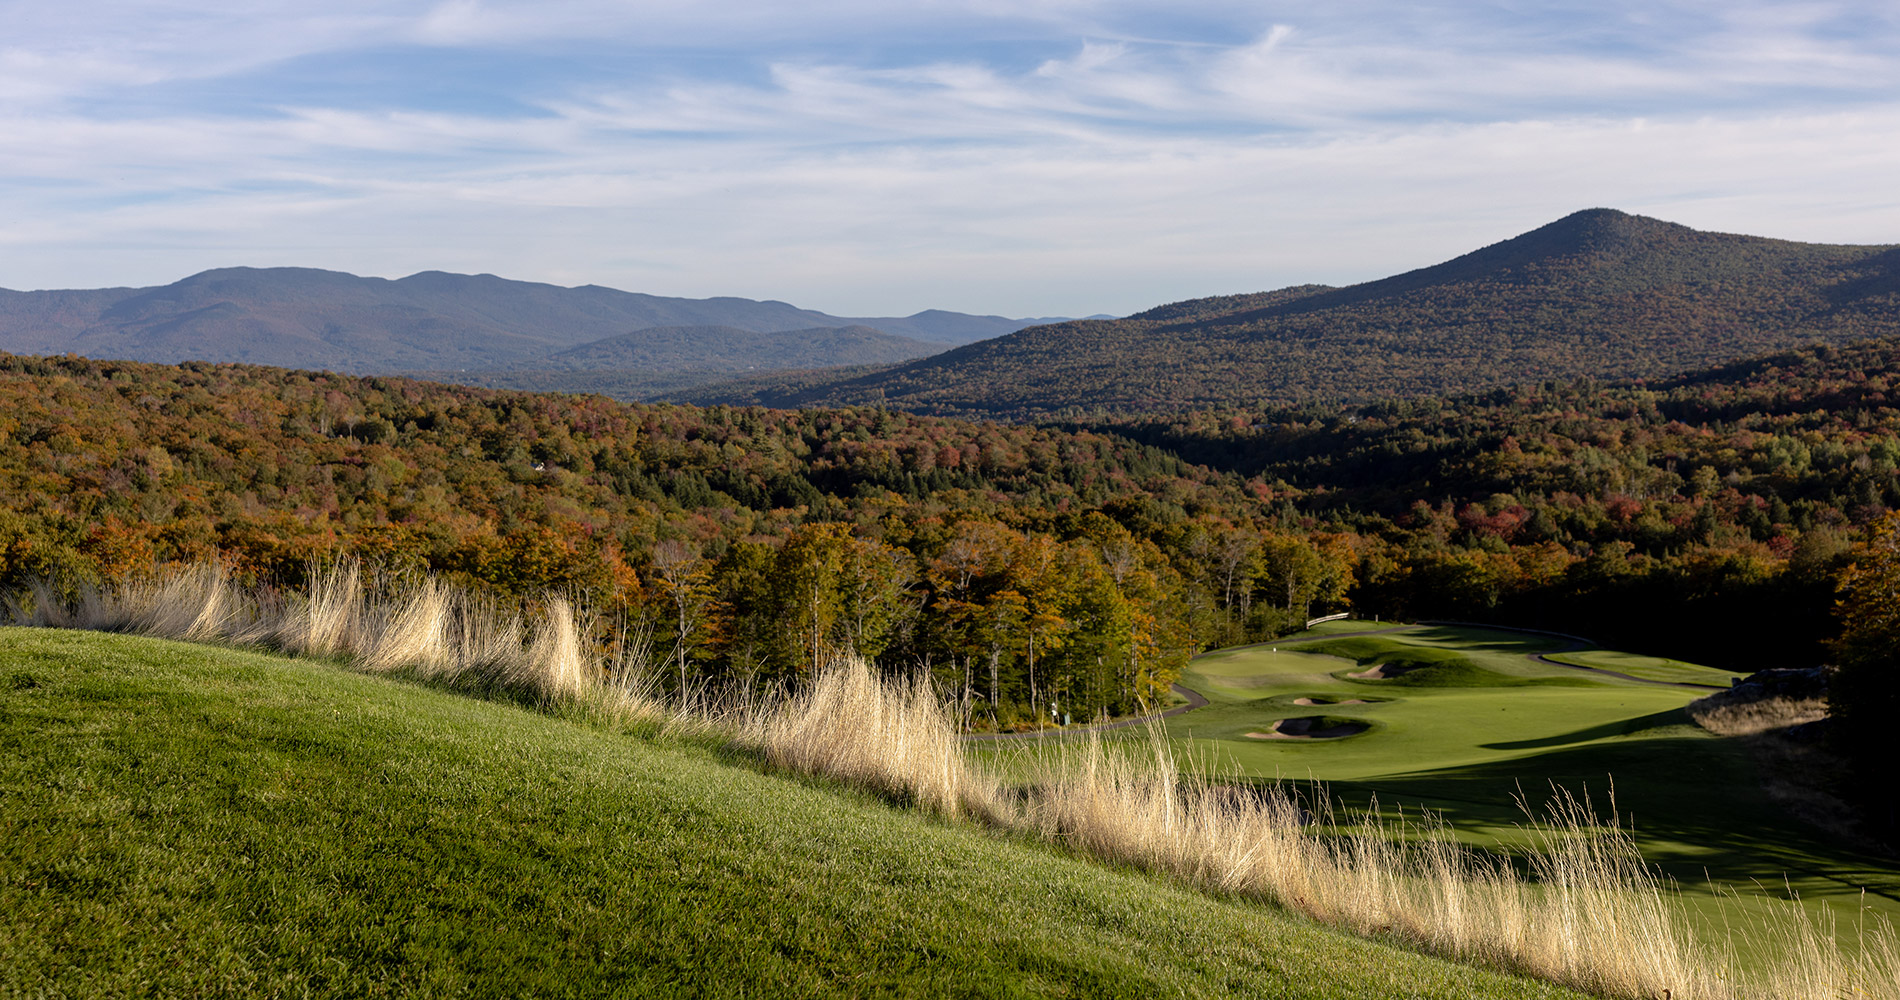 Viewing the rolling hills of a serene golf course in the Green Mountains of Vermont